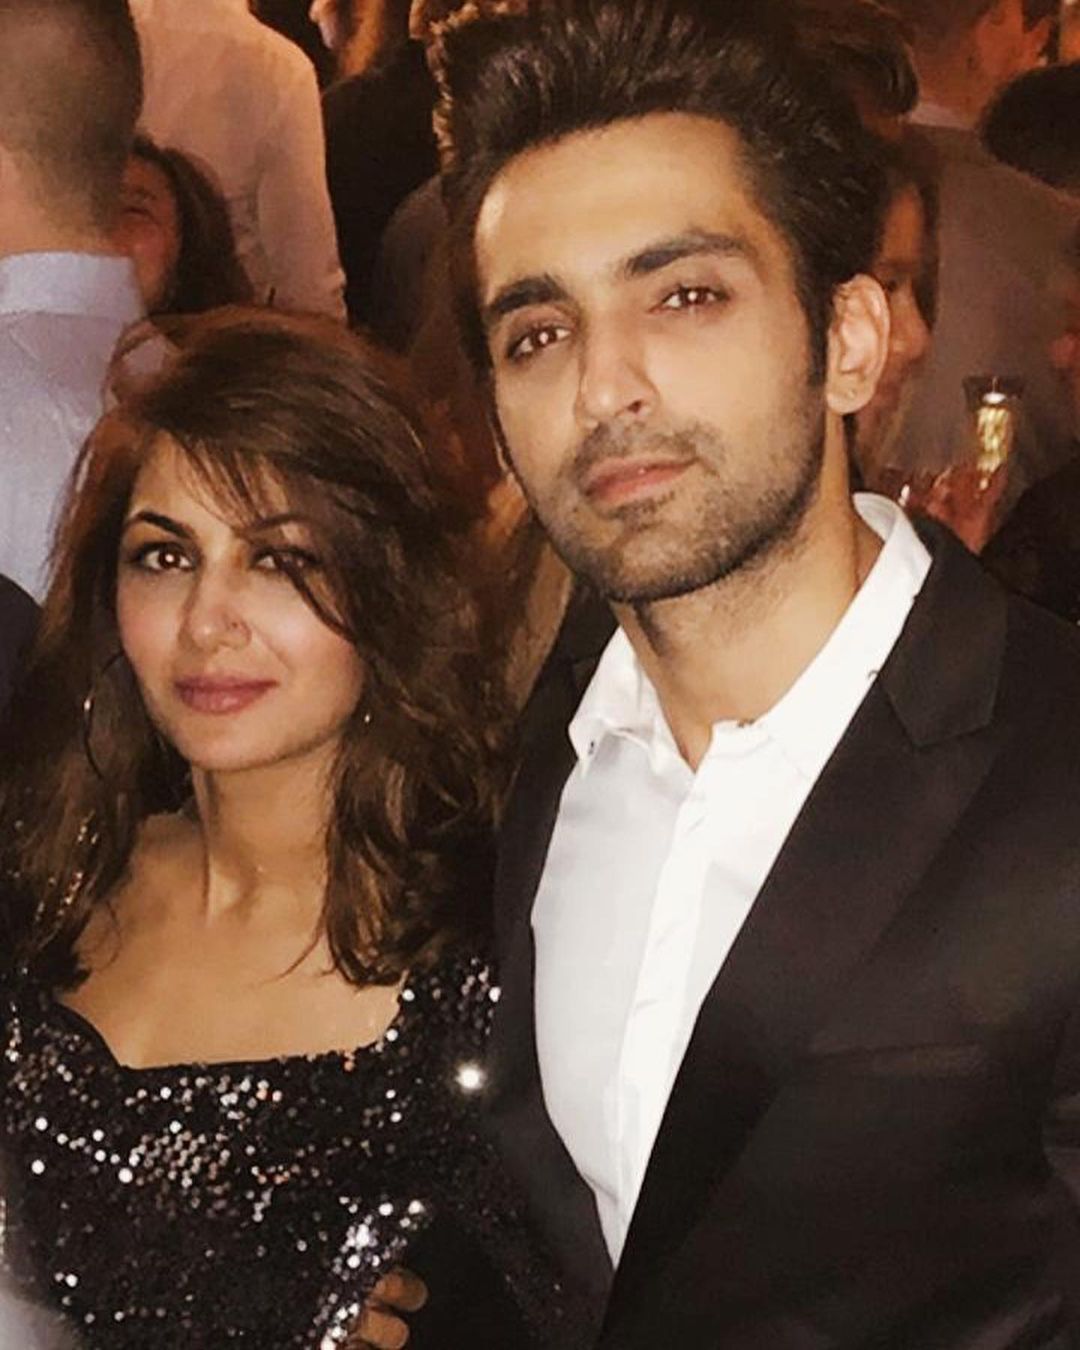 Exclusive – Arjit Taneja Is Working On Kaise Mujhe Tum Mil Gaye Opposite Sriti Jha; He Says, “It Is Funny To Romance Your Close Friend”!